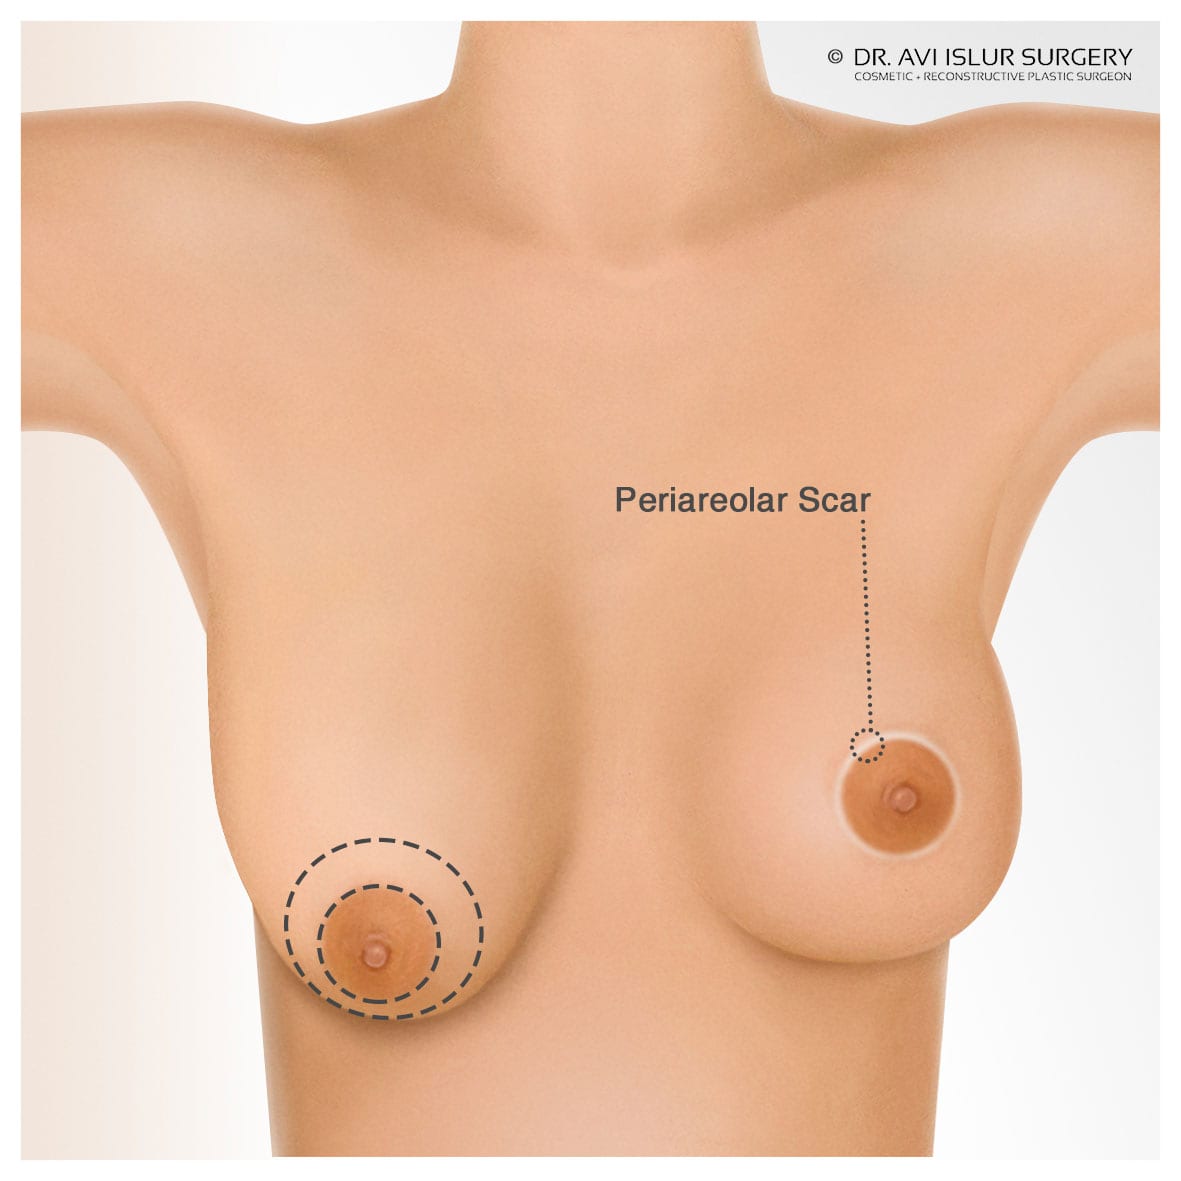 Illustration of a Periareolar Scar for Breast Lift Surgery